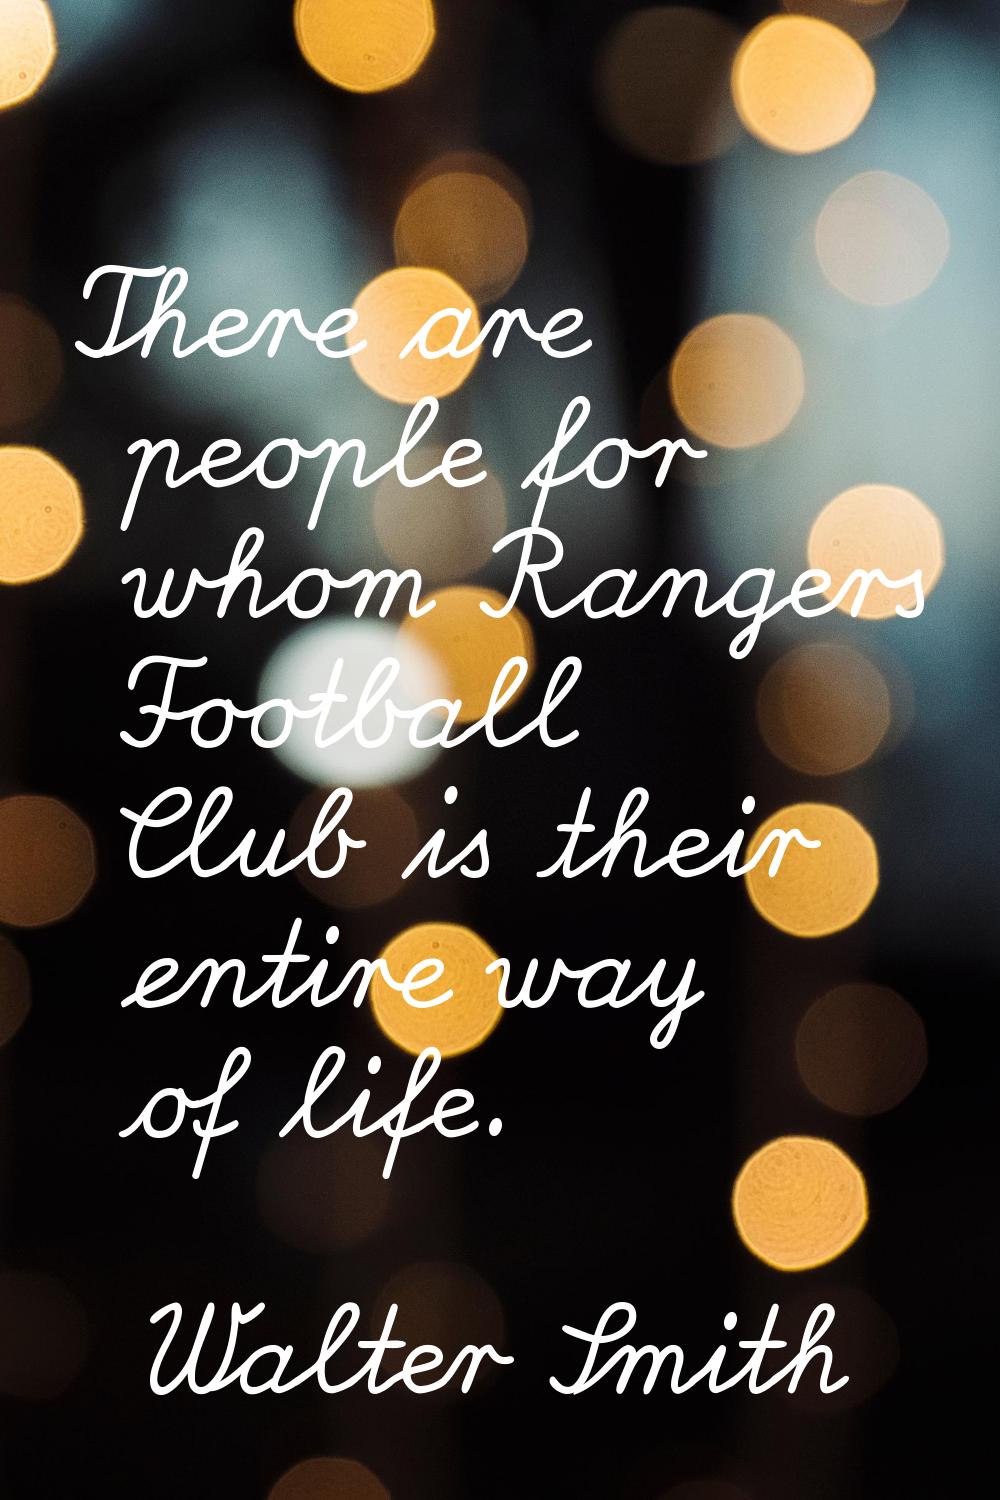 There are people for whom Rangers Football Club is their entire way of life.